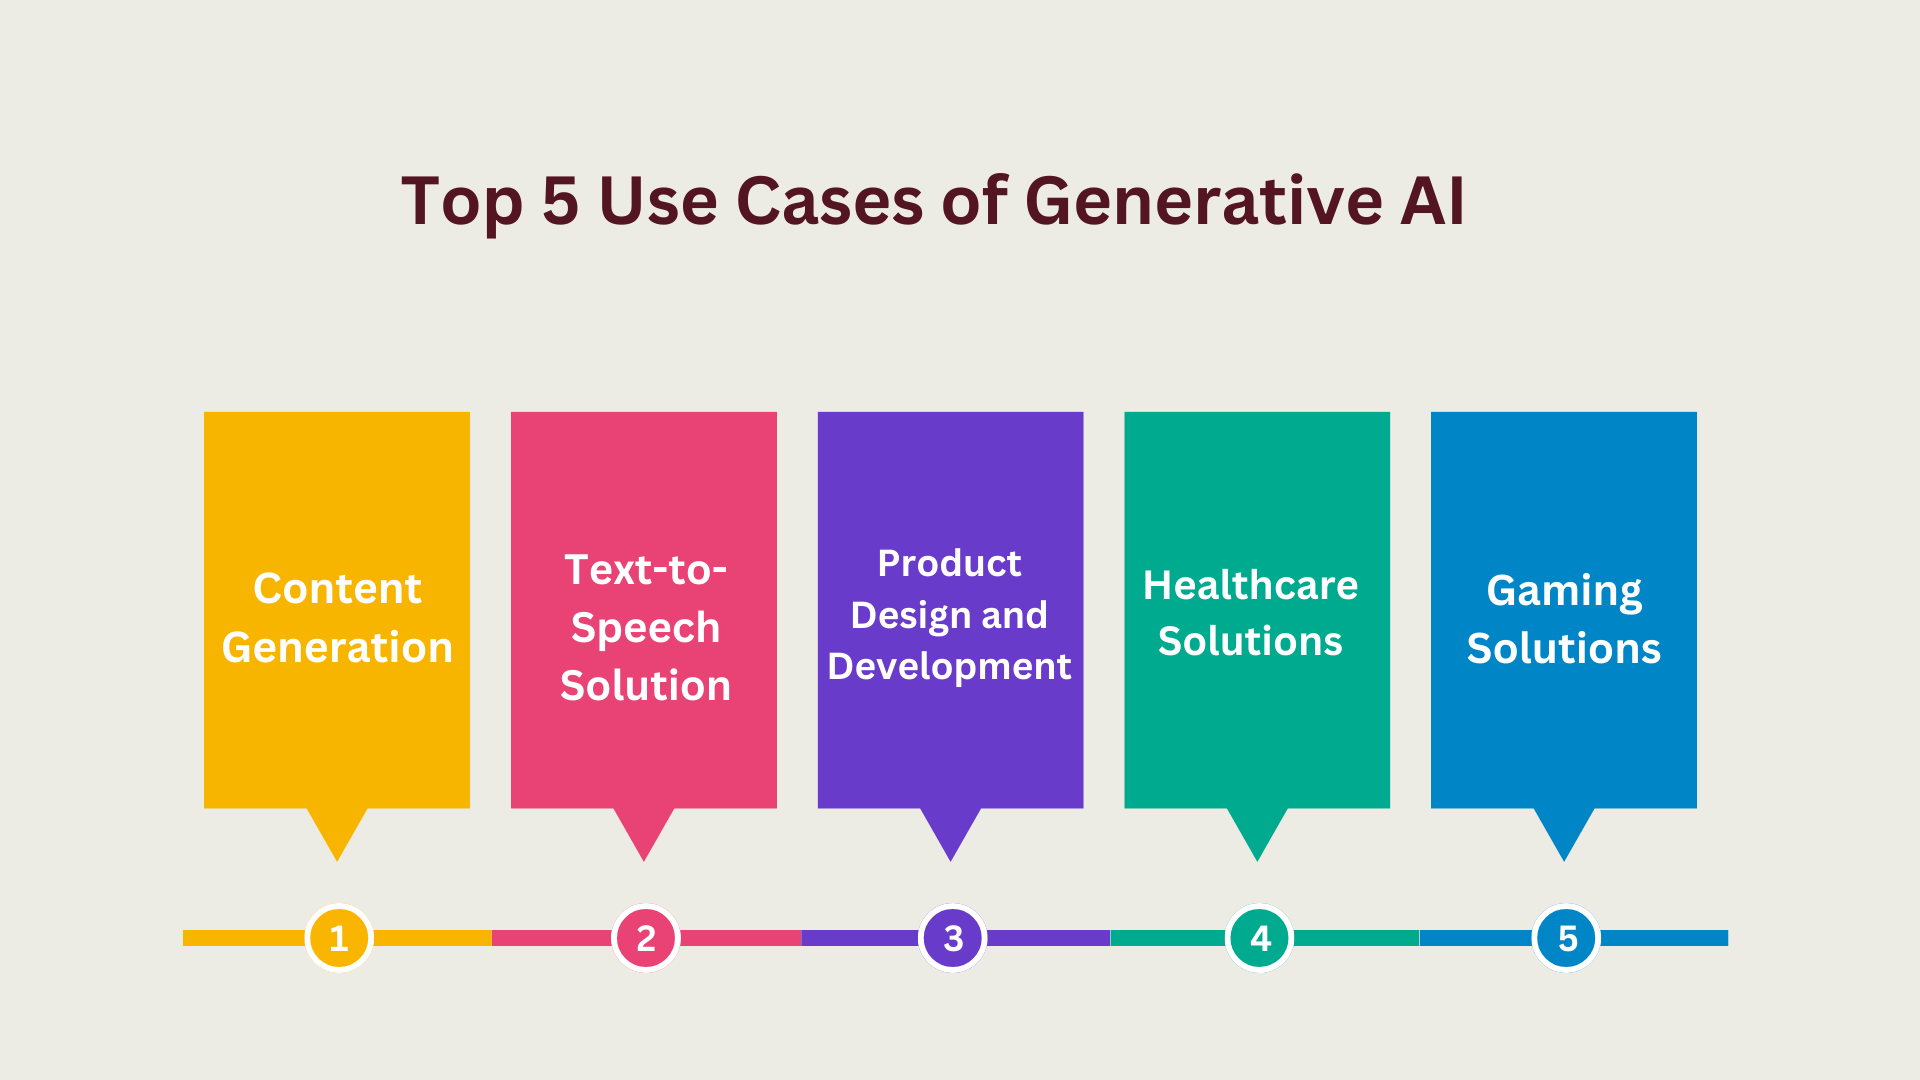 Top 5 Use Cases of Generative AI
